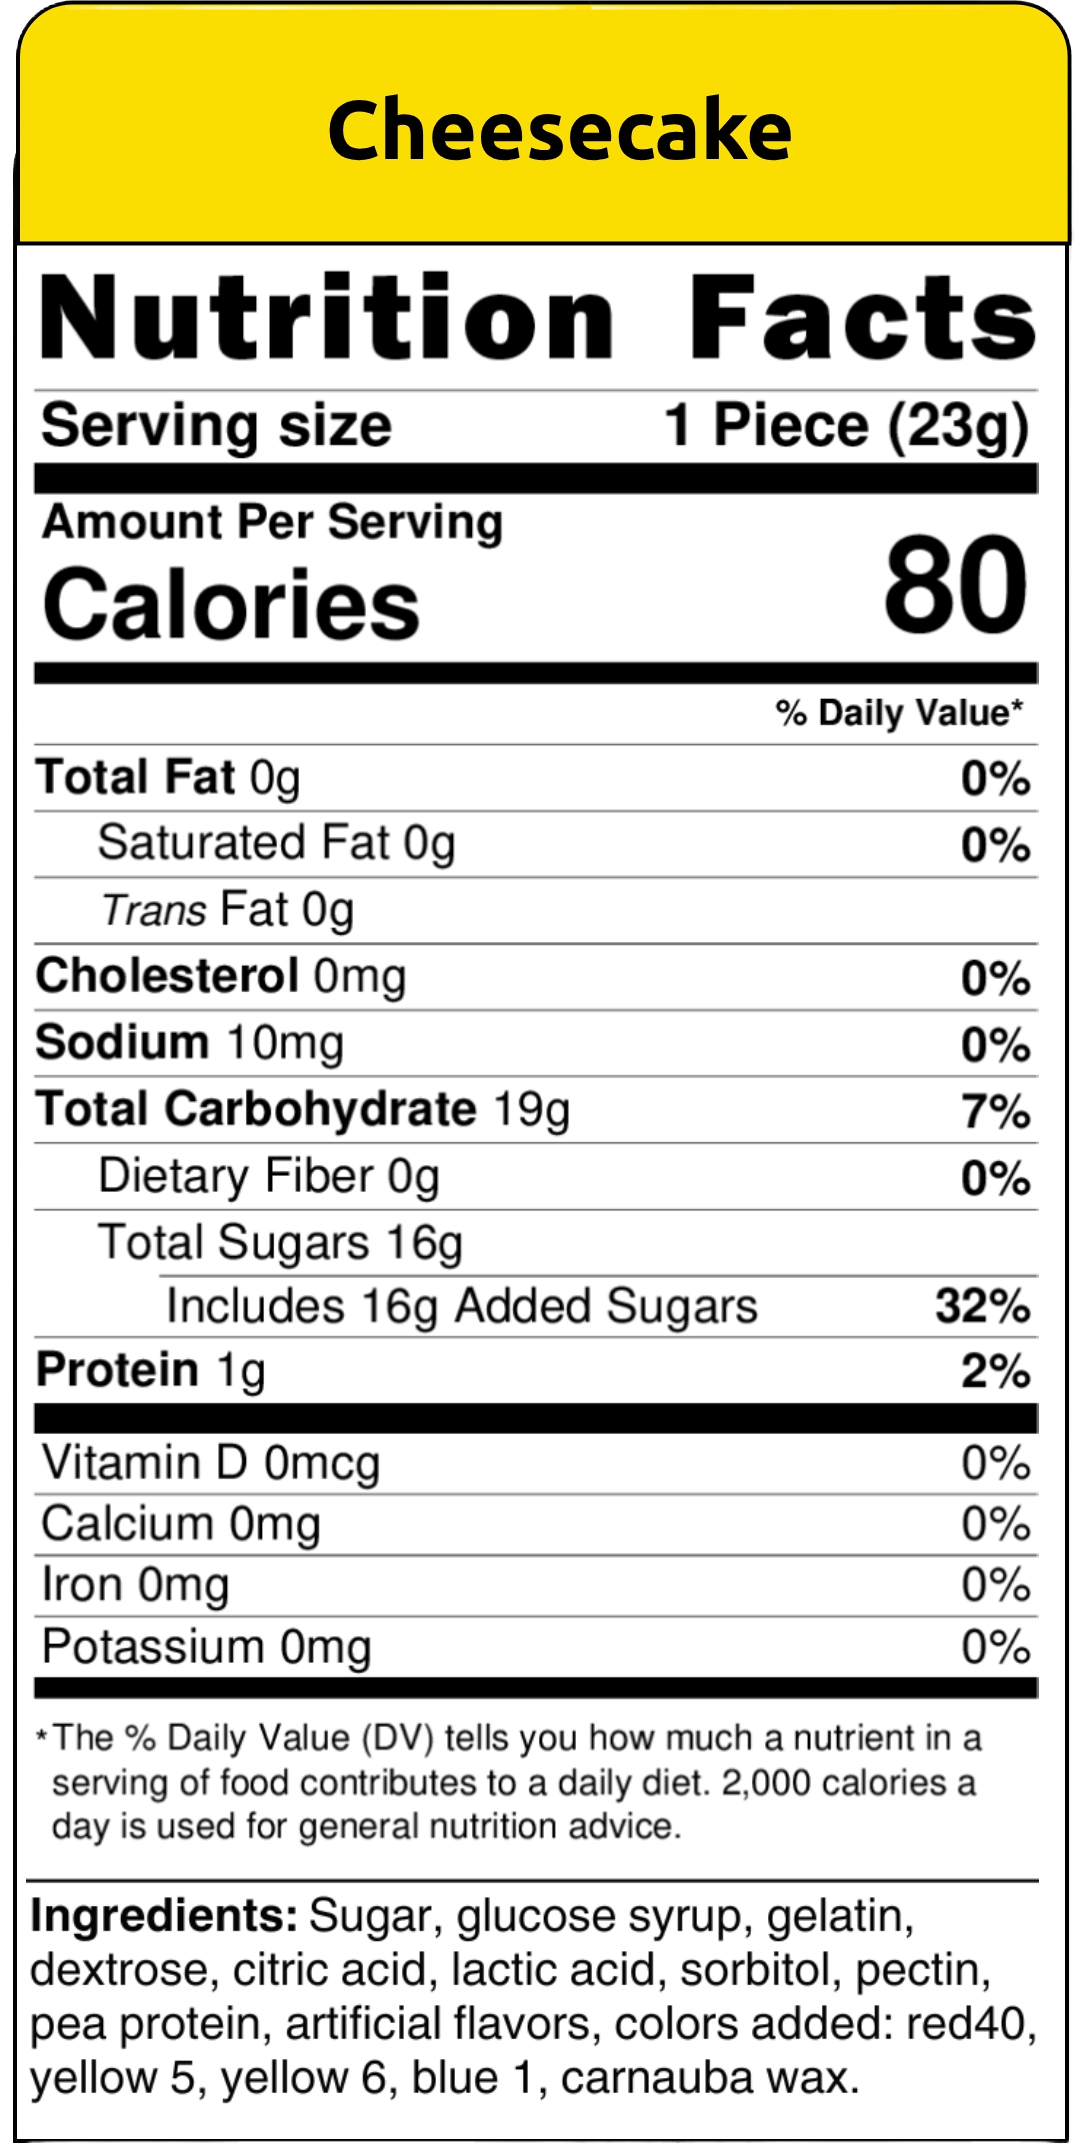 nutritional facts cheesecake 6ct